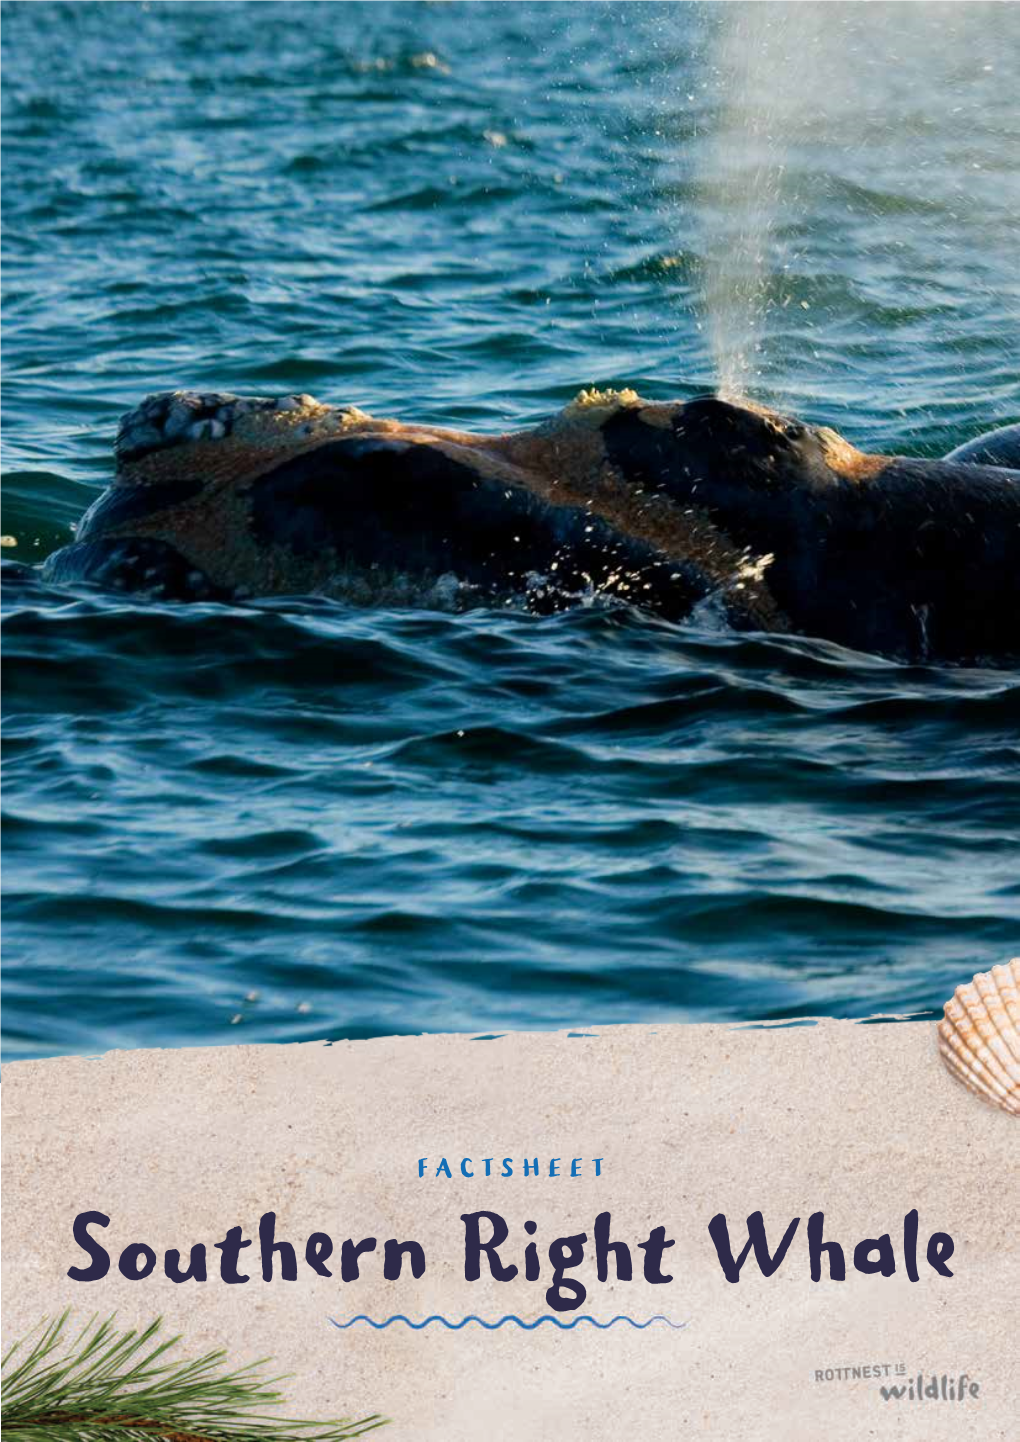 Download the Southern Right Whale Fact File!